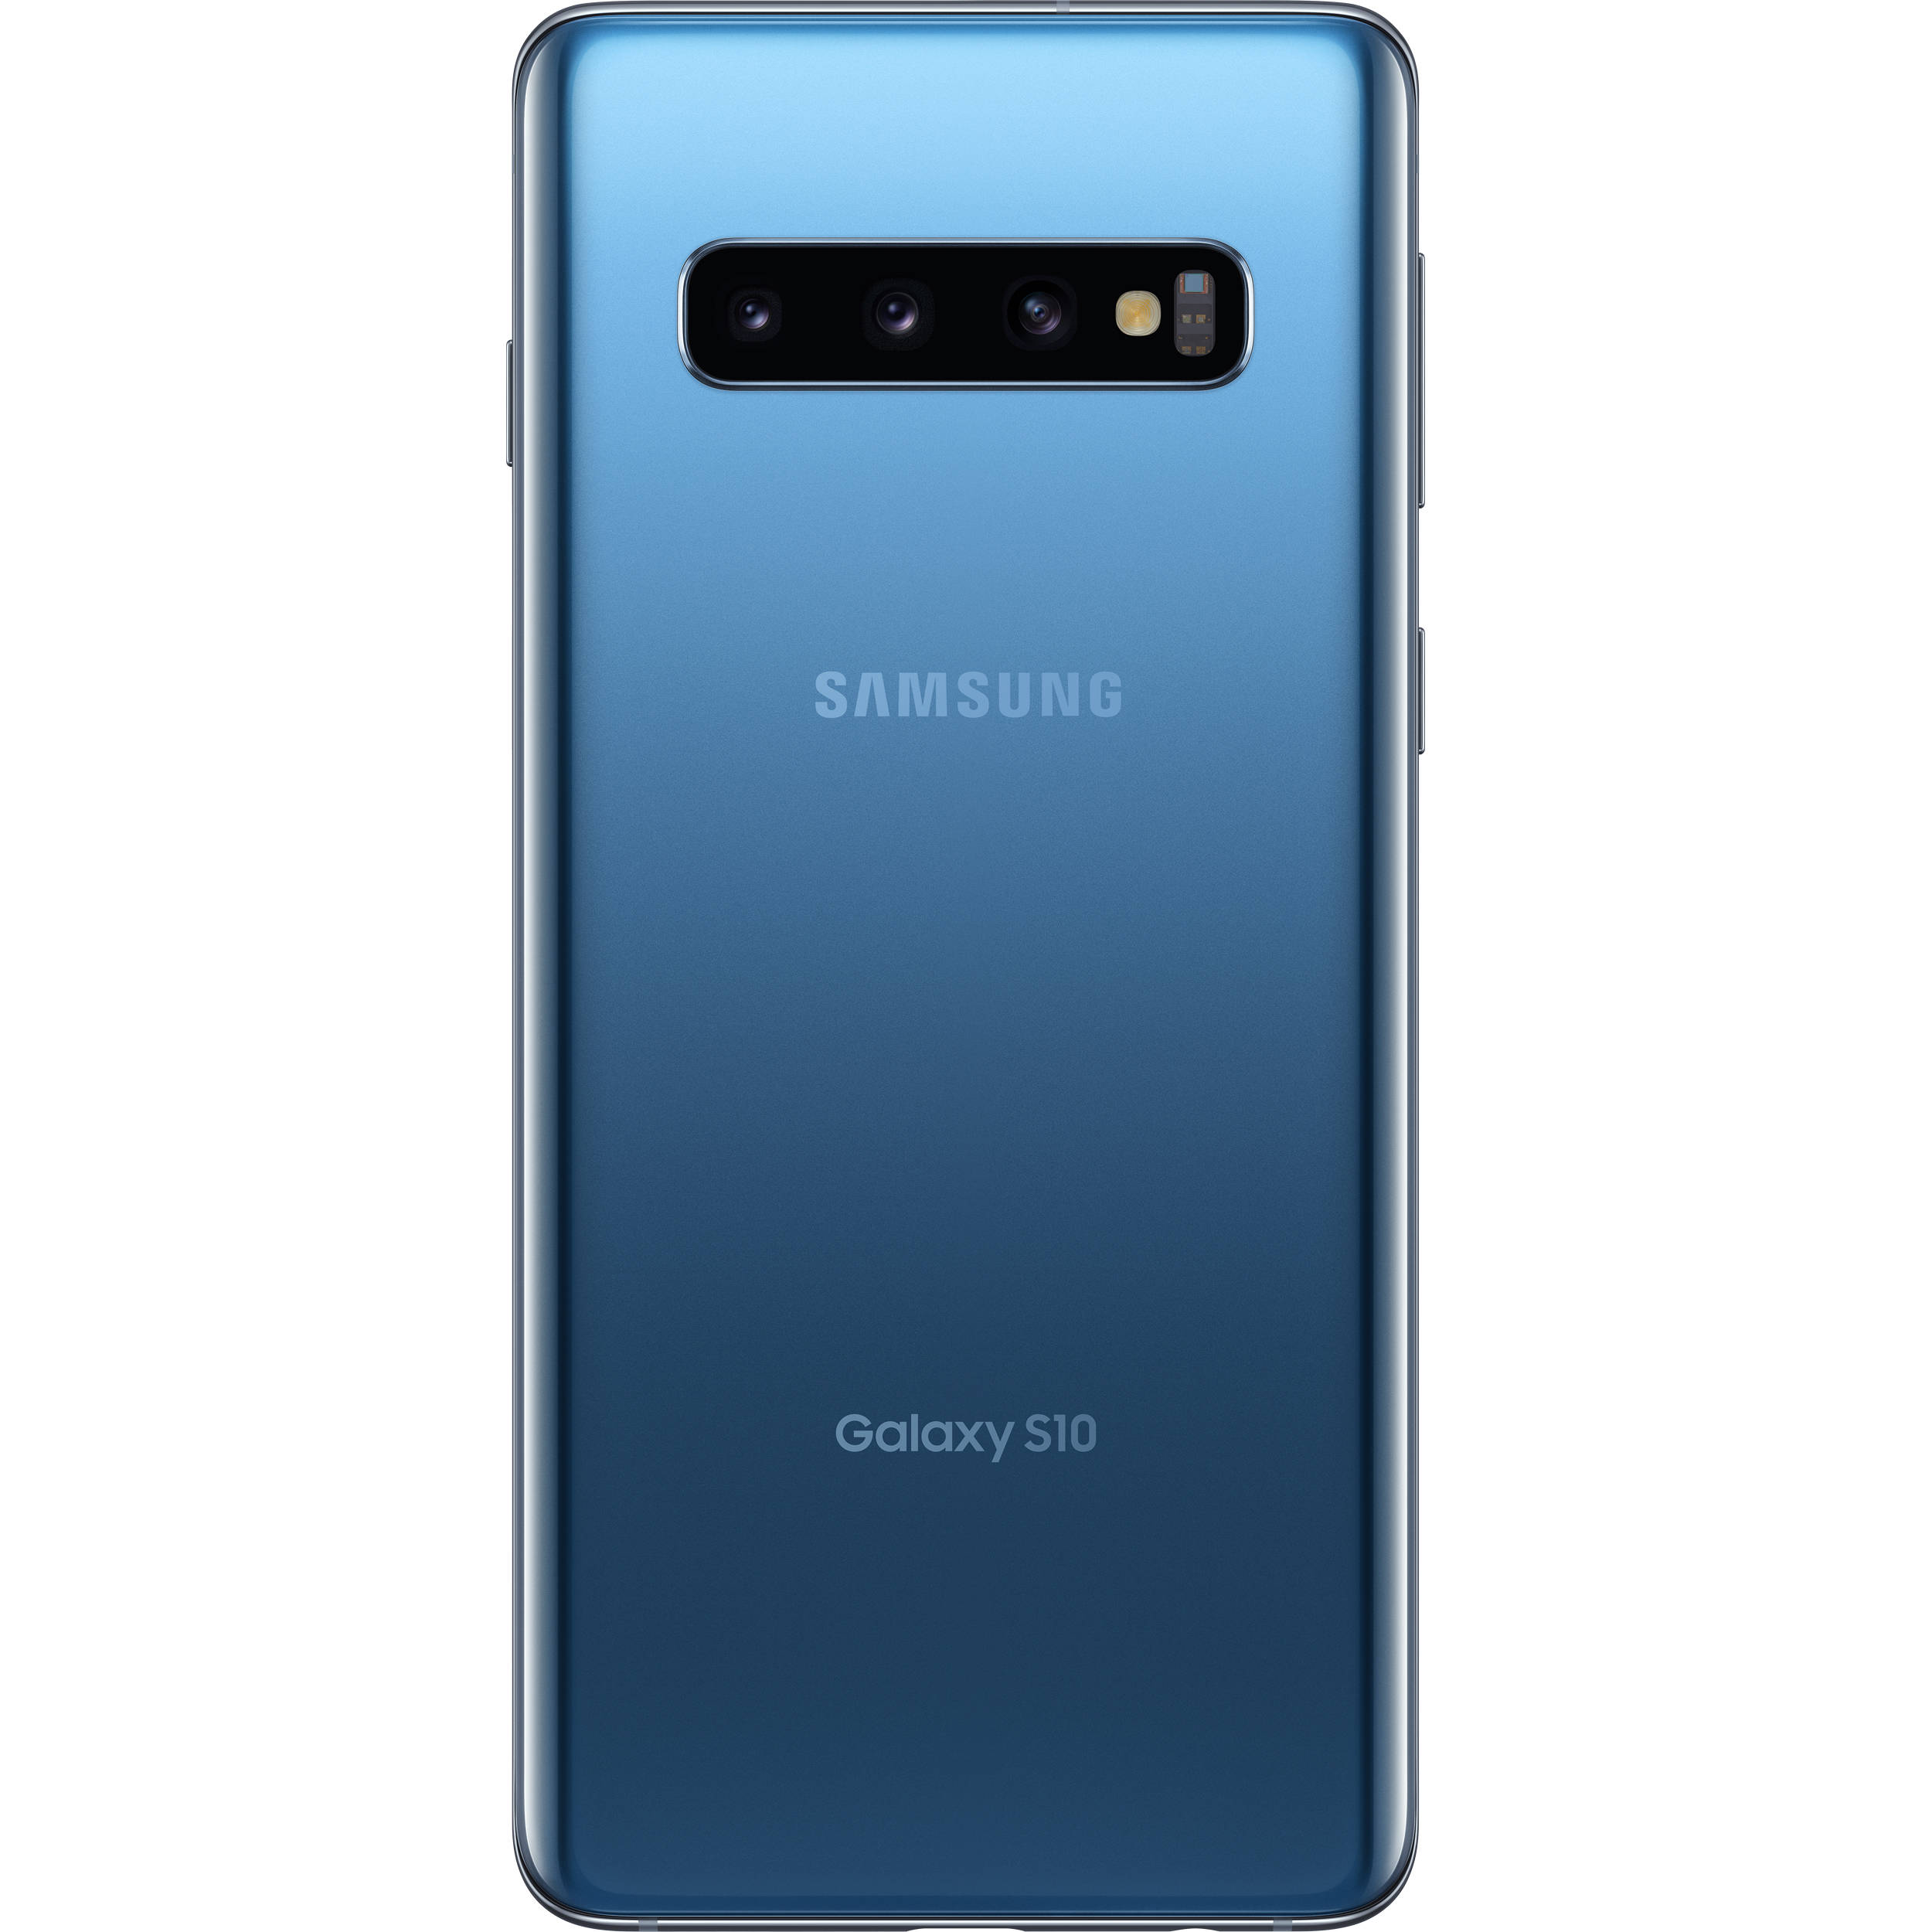 Pre-Owned Samsung Galaxy S10 G973U 128GB GSM/CDMA Unlocked Android Phone - Prism Blue (Refurbished: Good) - image 3 of 3